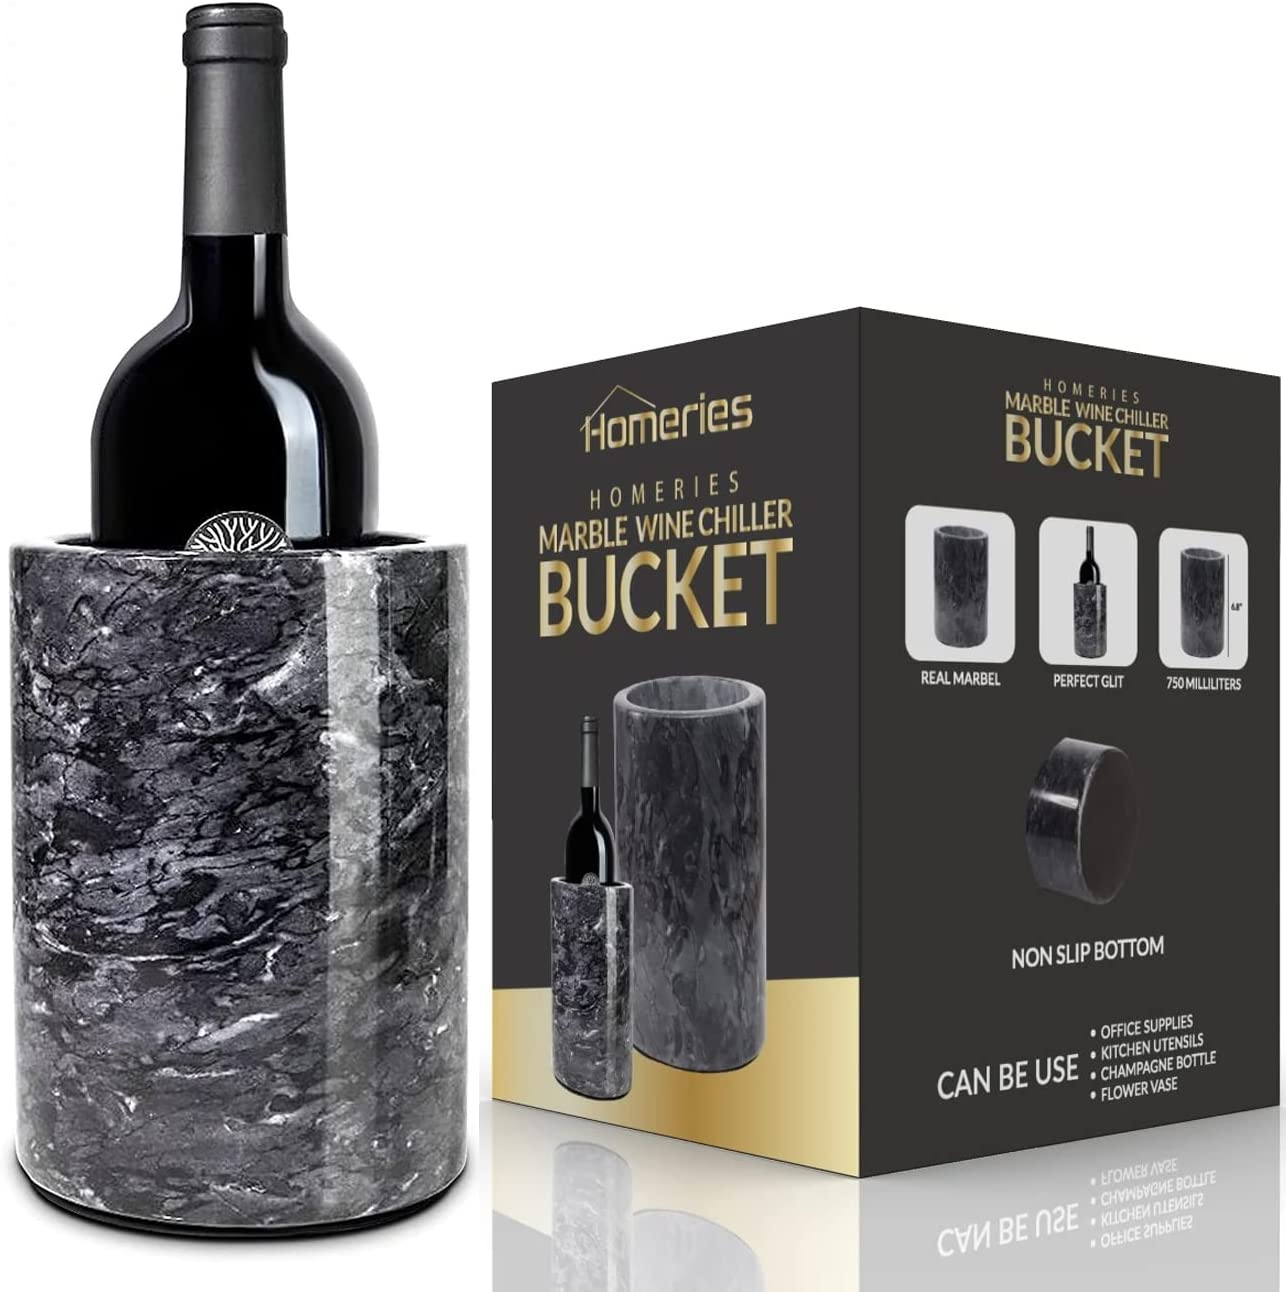 Stoned - burgundy marble bottle cooler - Ir.ma